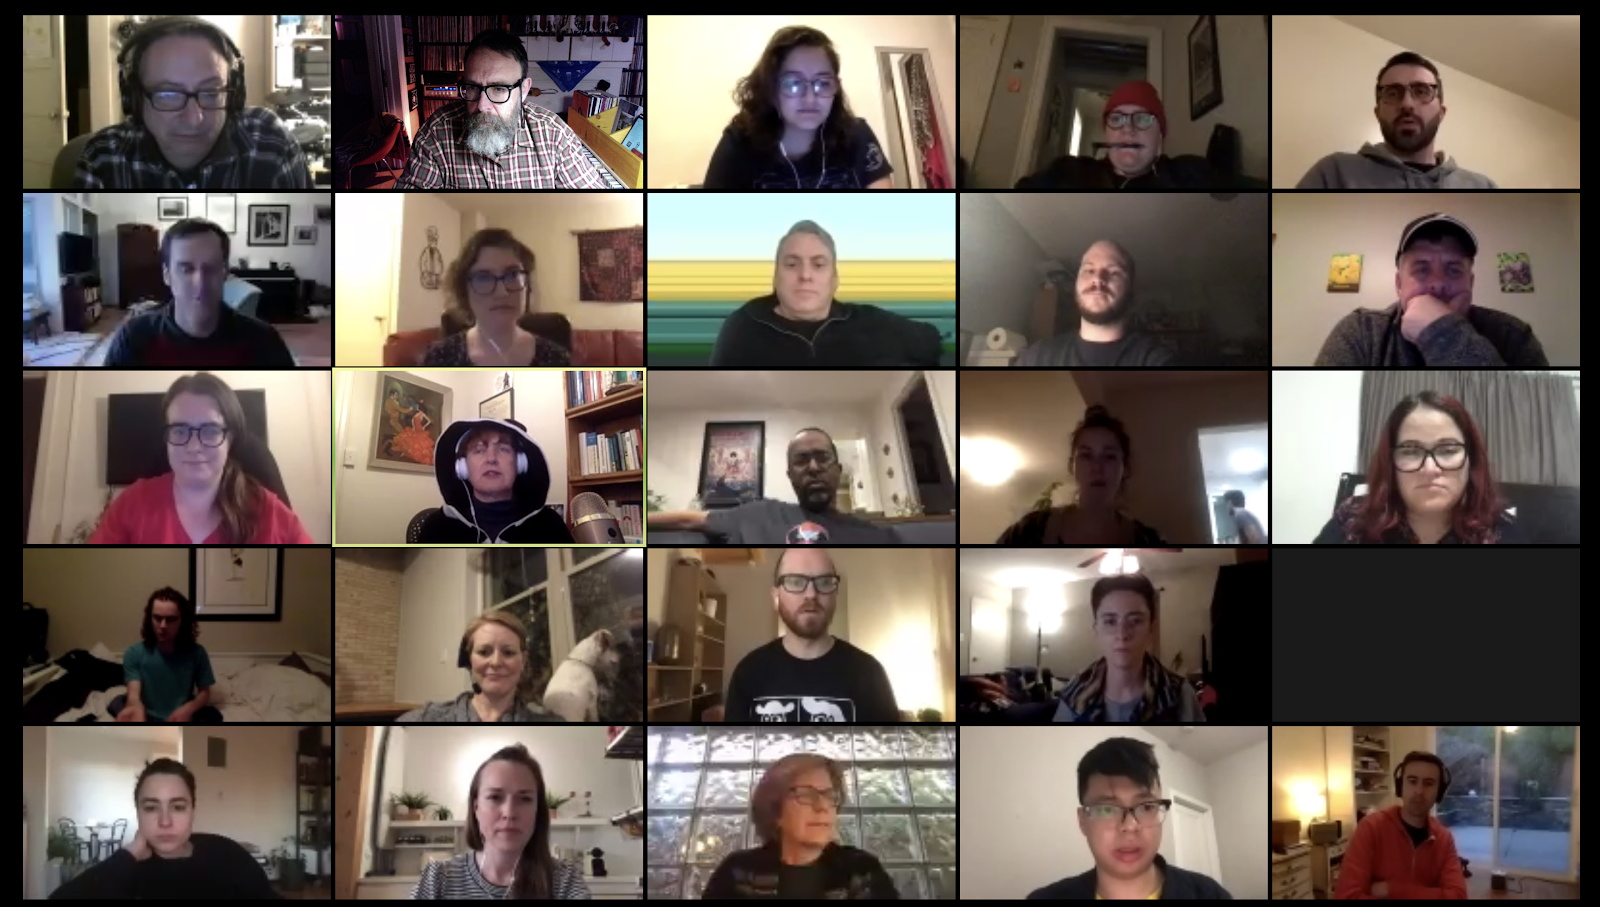 Screengrab of the Zoom video conference with 25 participants in grid format.